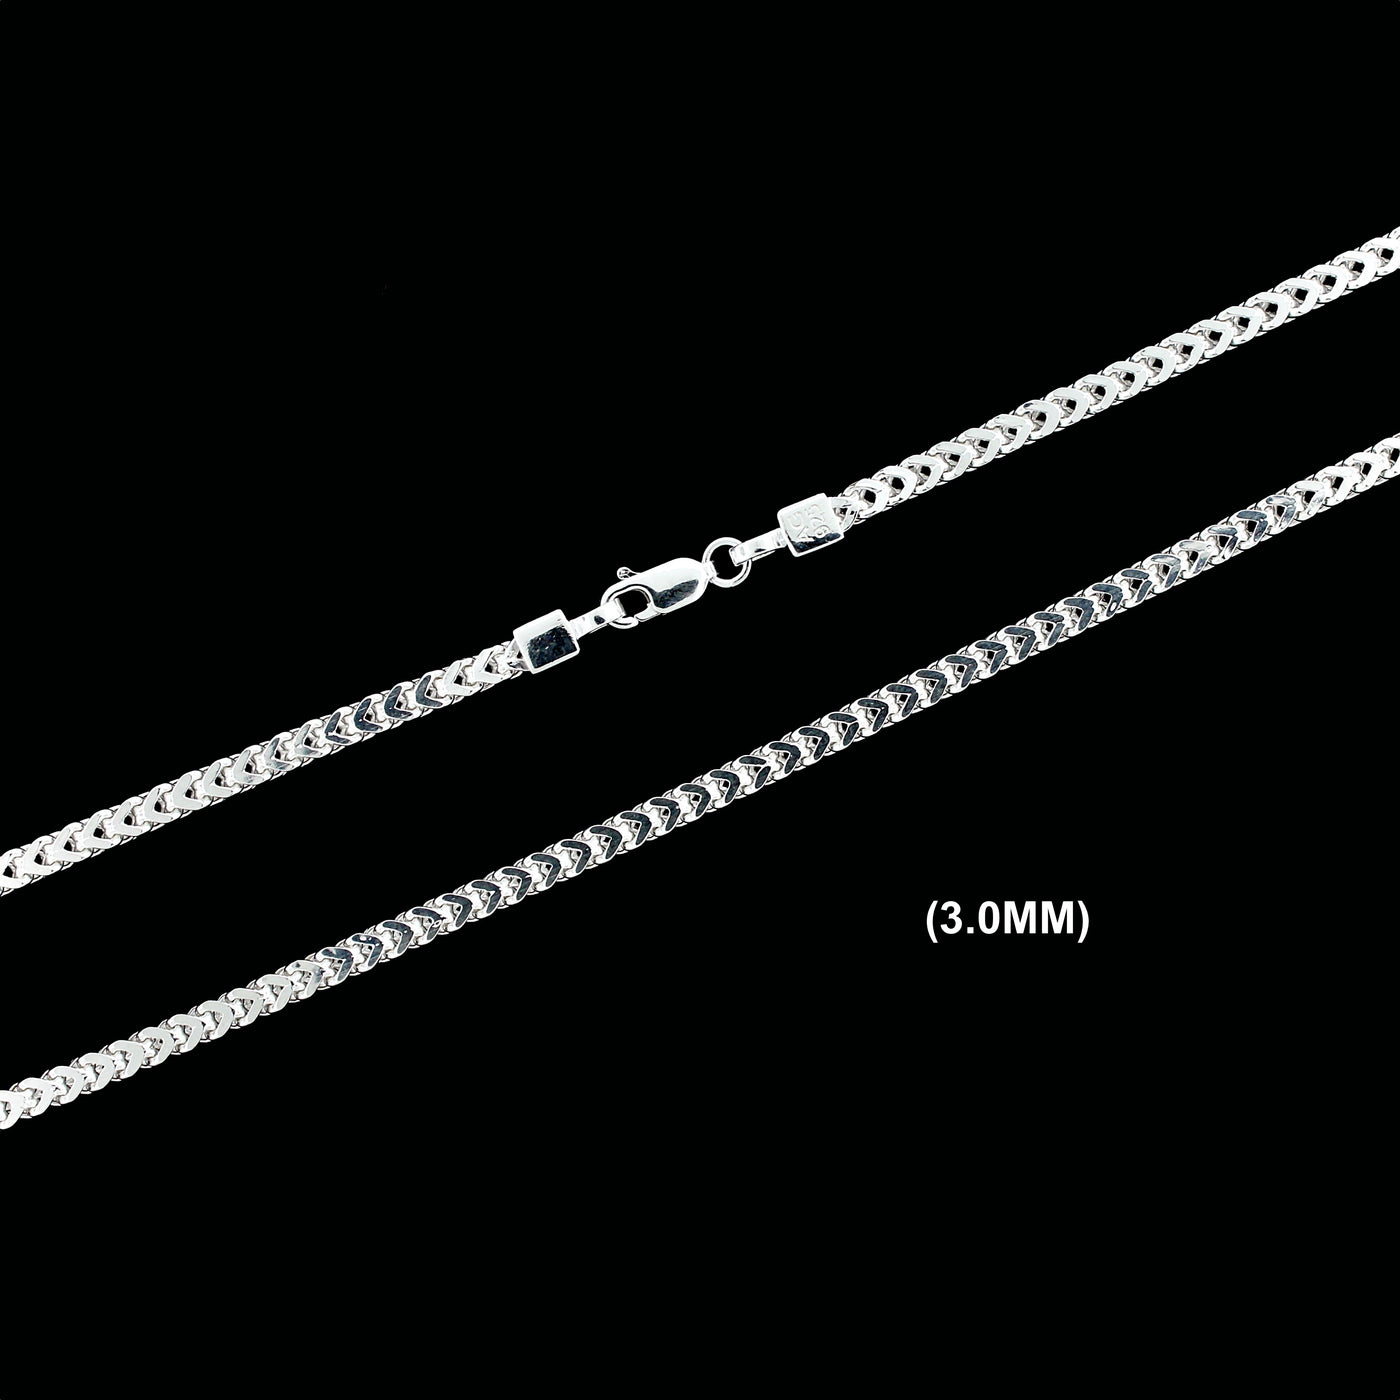 3MM Solid 925 Sterling Silver Franco Link Chain Necklace or Bracelet ITALY